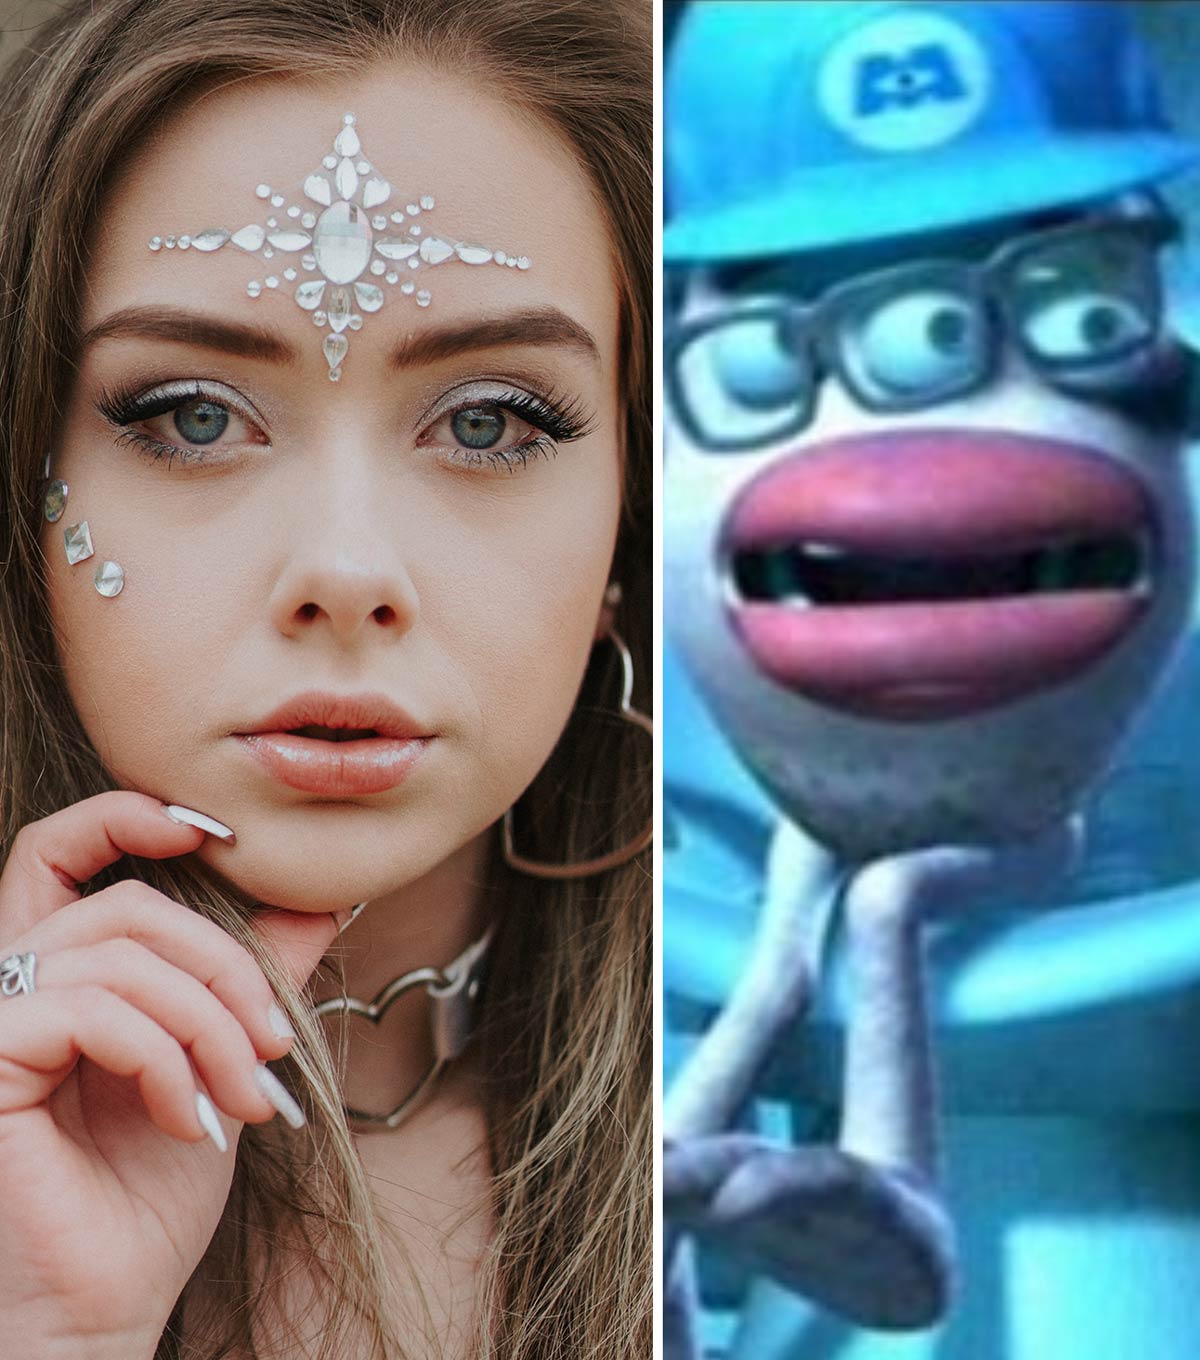 How women with lip filler think they look vs. how they really look